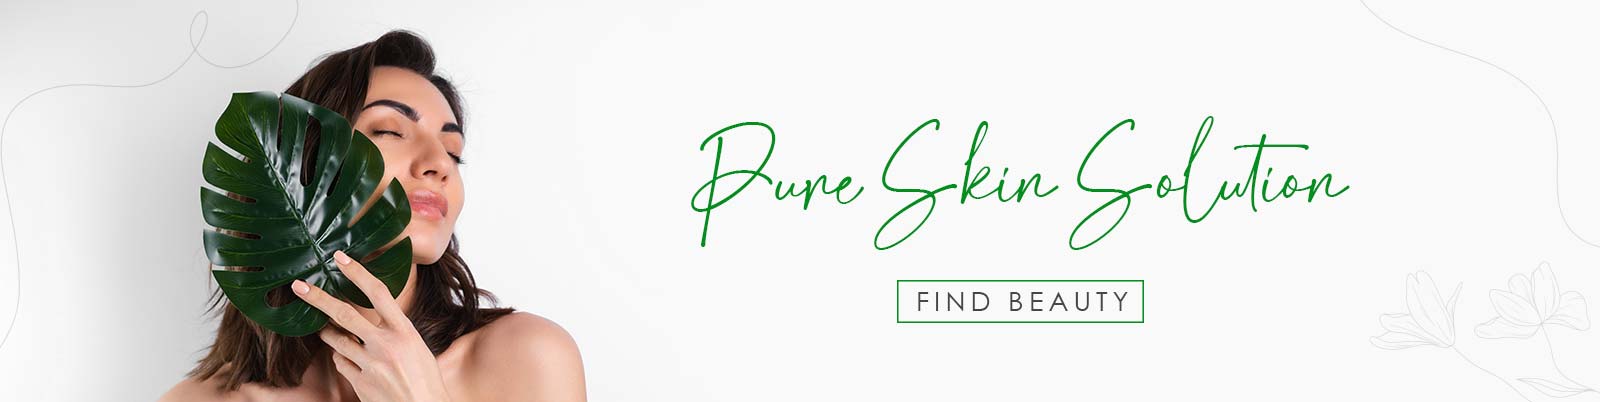 Pure Skin Solution Find Beauty